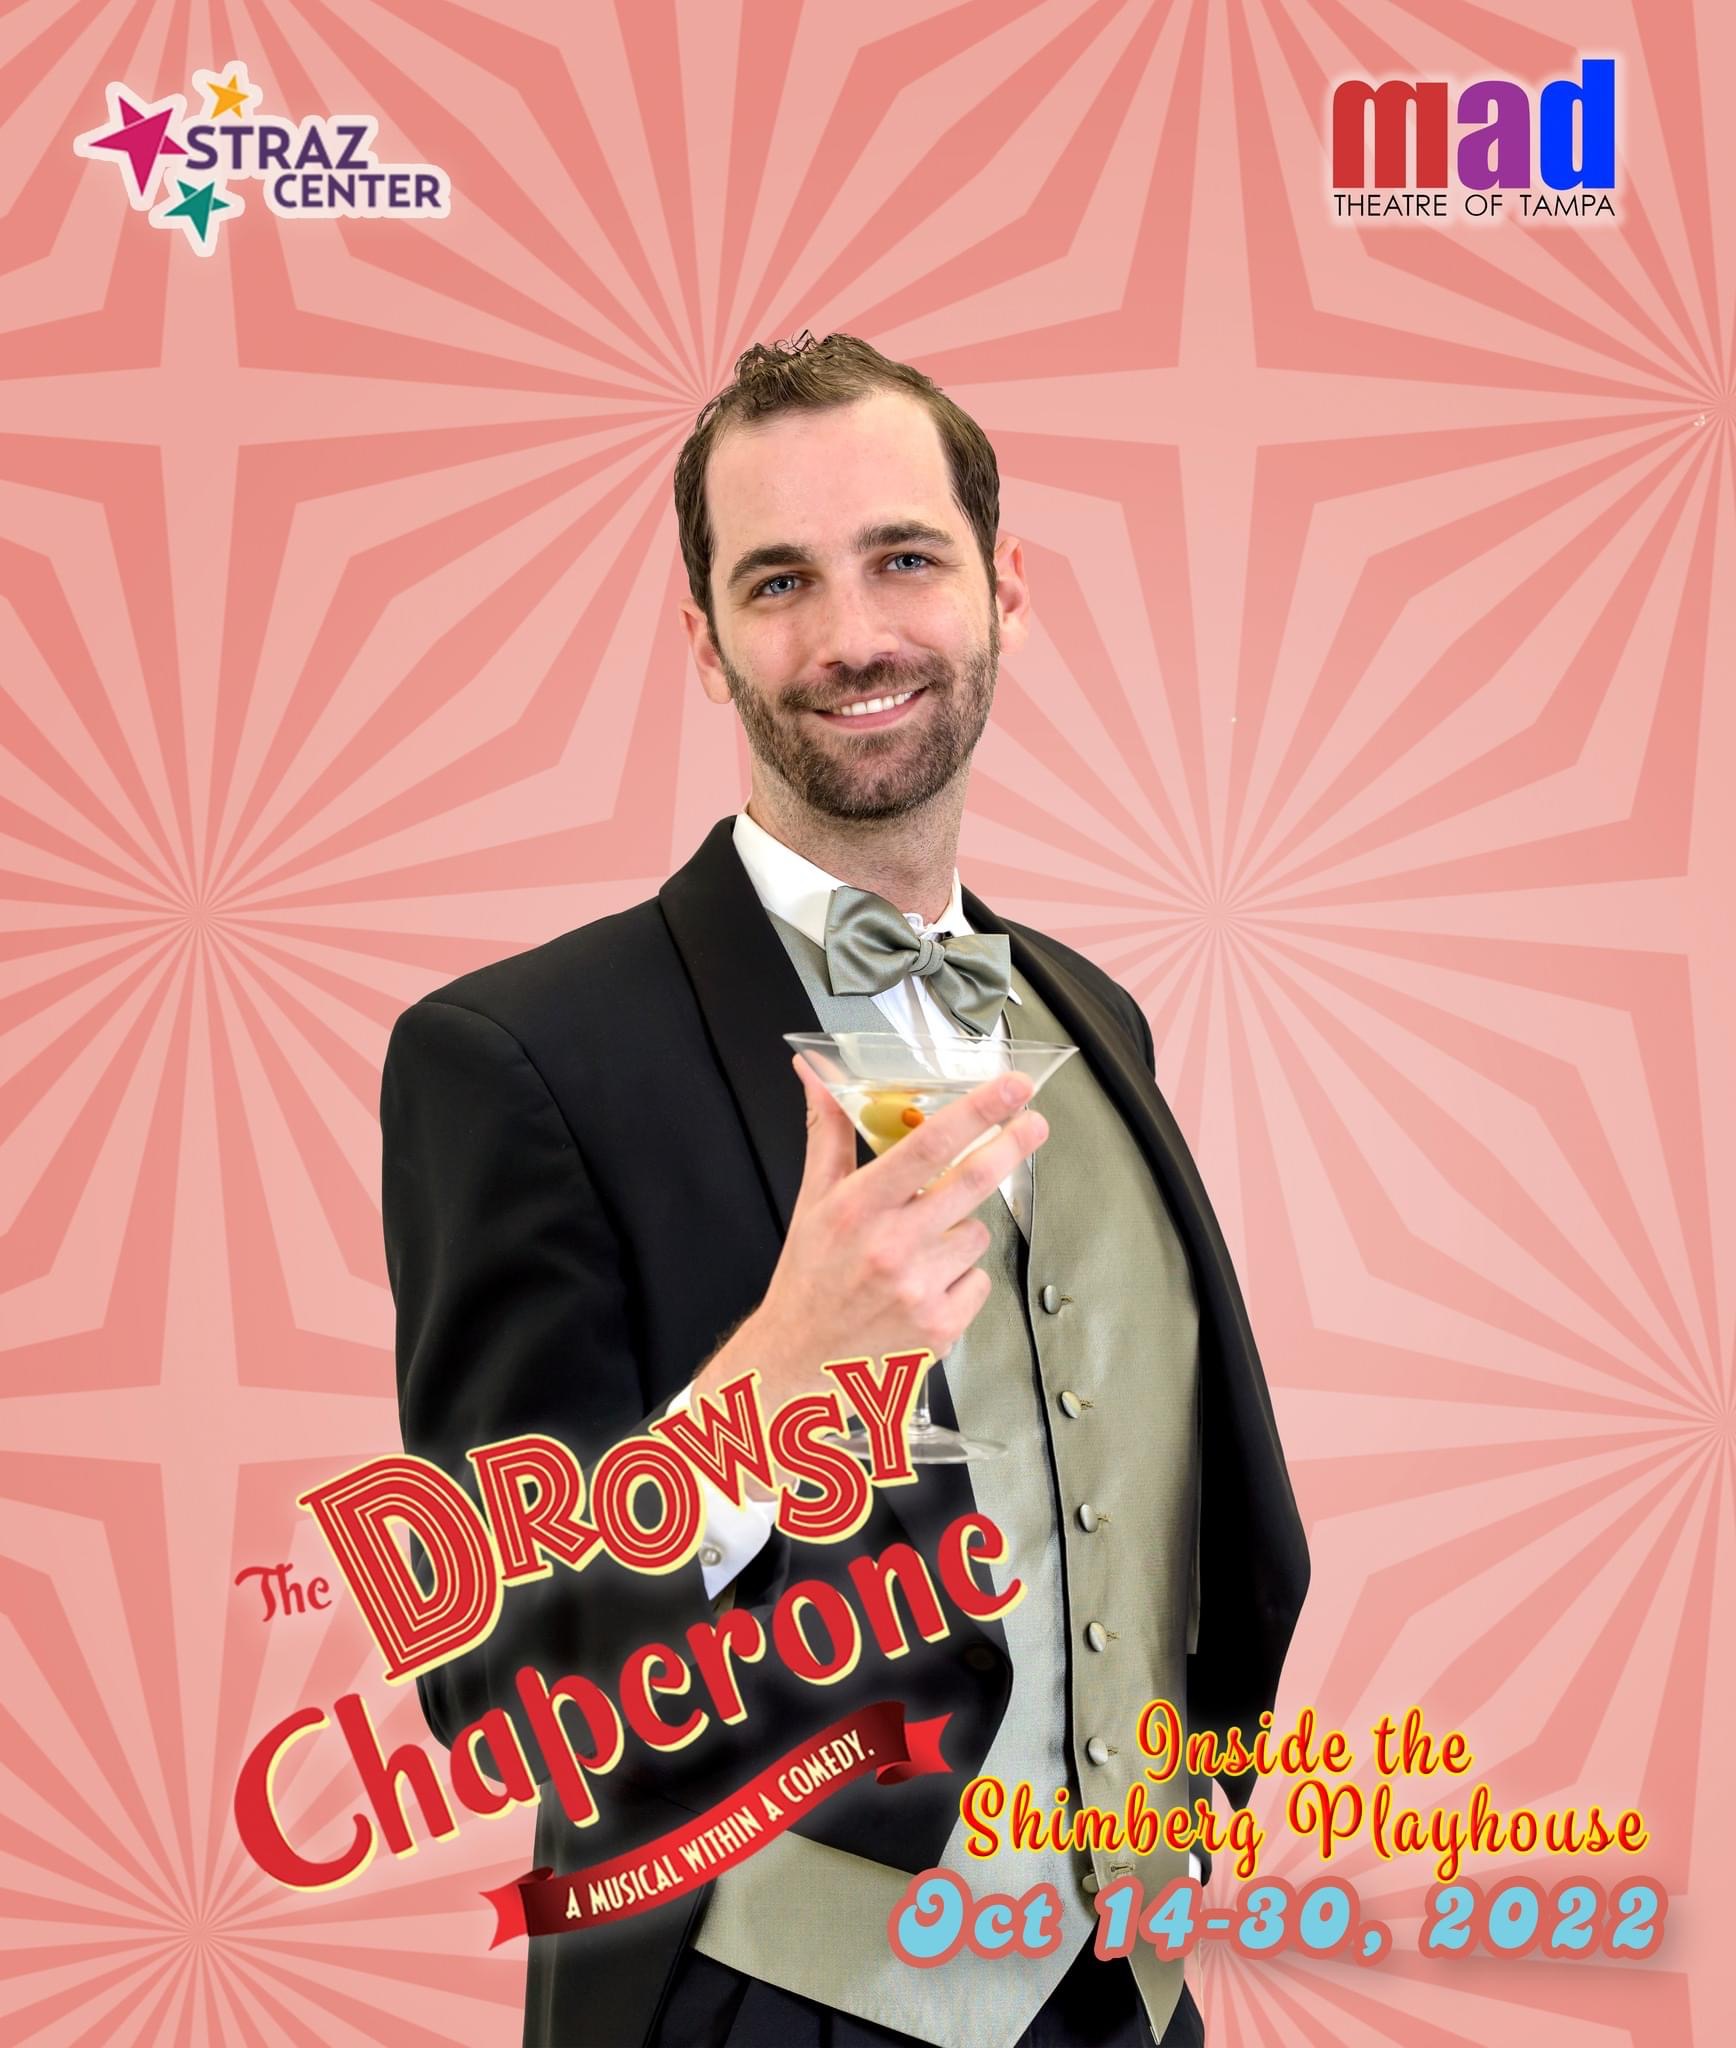 Meet Robert as played by Bernard McNicol in mad Theatre of Tampa’s “The Drowsy Chaperone